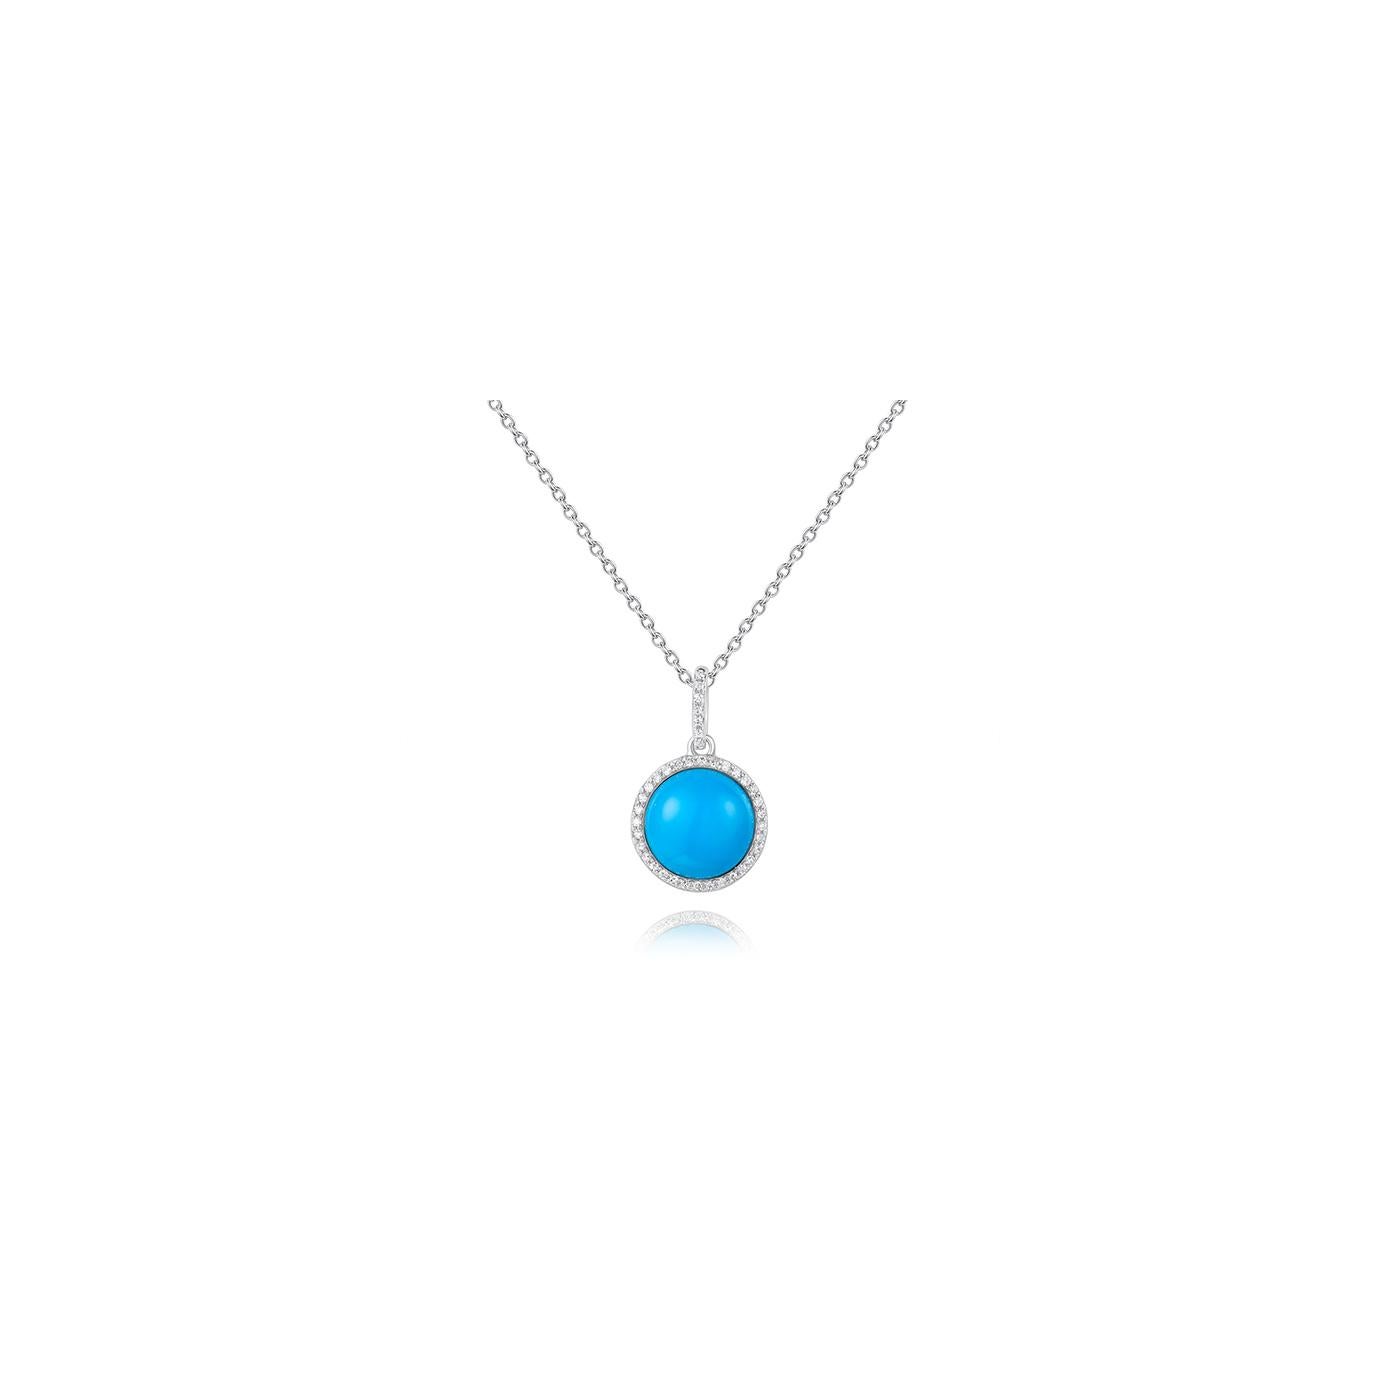 Aesthetic Movement 2.05 Carat Natural Turquoise and Diamond Necklace Pendant 14k White Gold